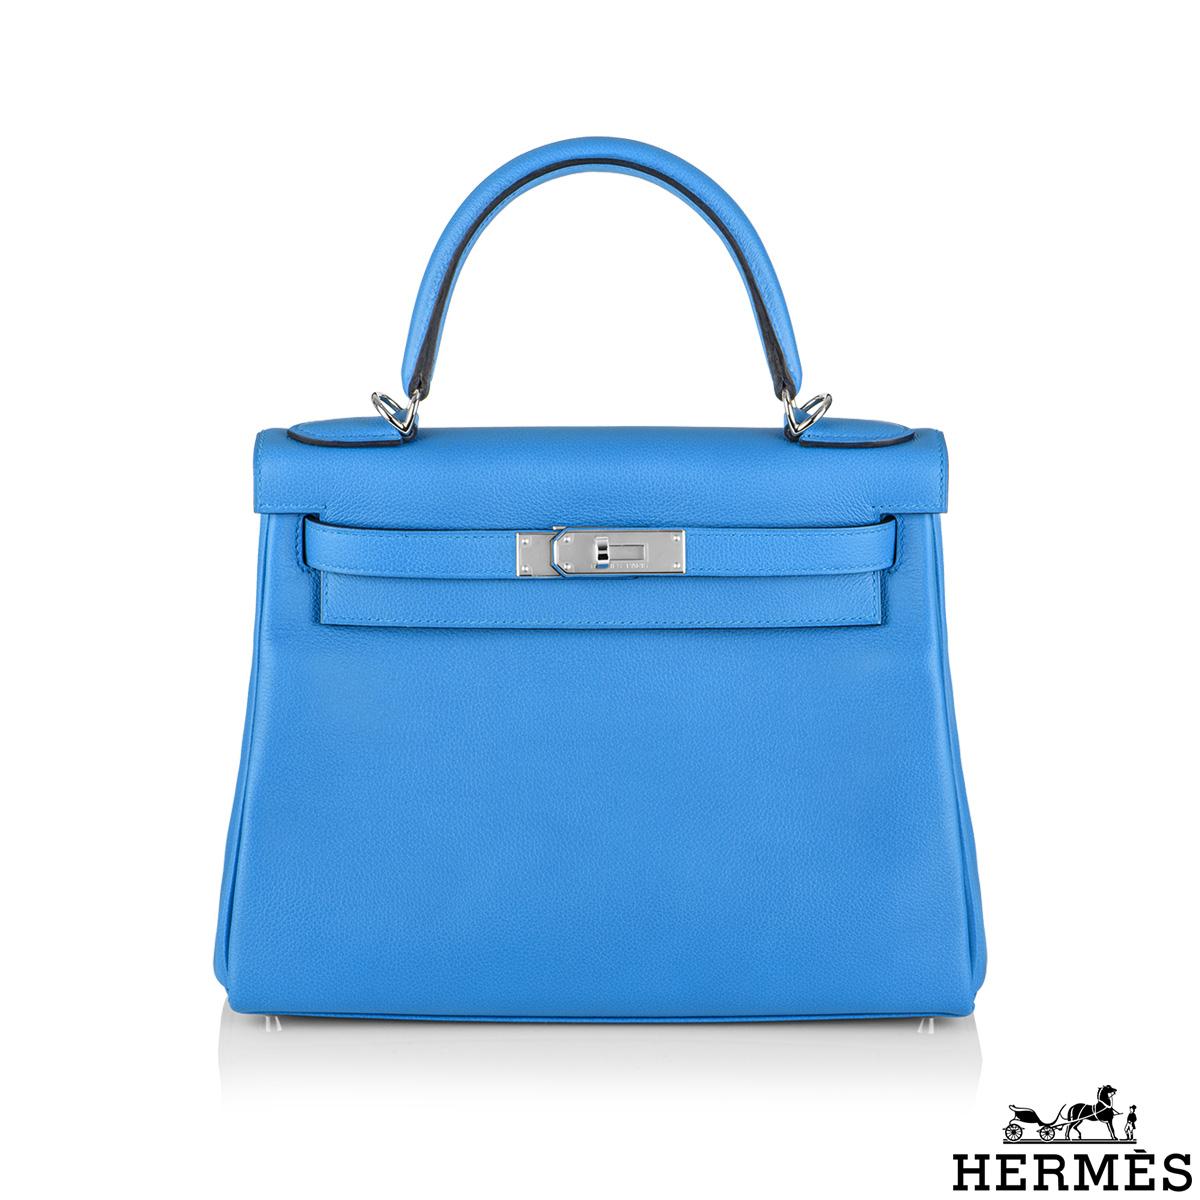 An exquisite Hermès Kelly II Bleu Frida Retourne 28cm Handbag. The vivid blue evercolour calfskin leather bag is detailed with palladium hardware. The exterior of this Kelly features a Retourne style in blue calfskin leather. It has a front toggle